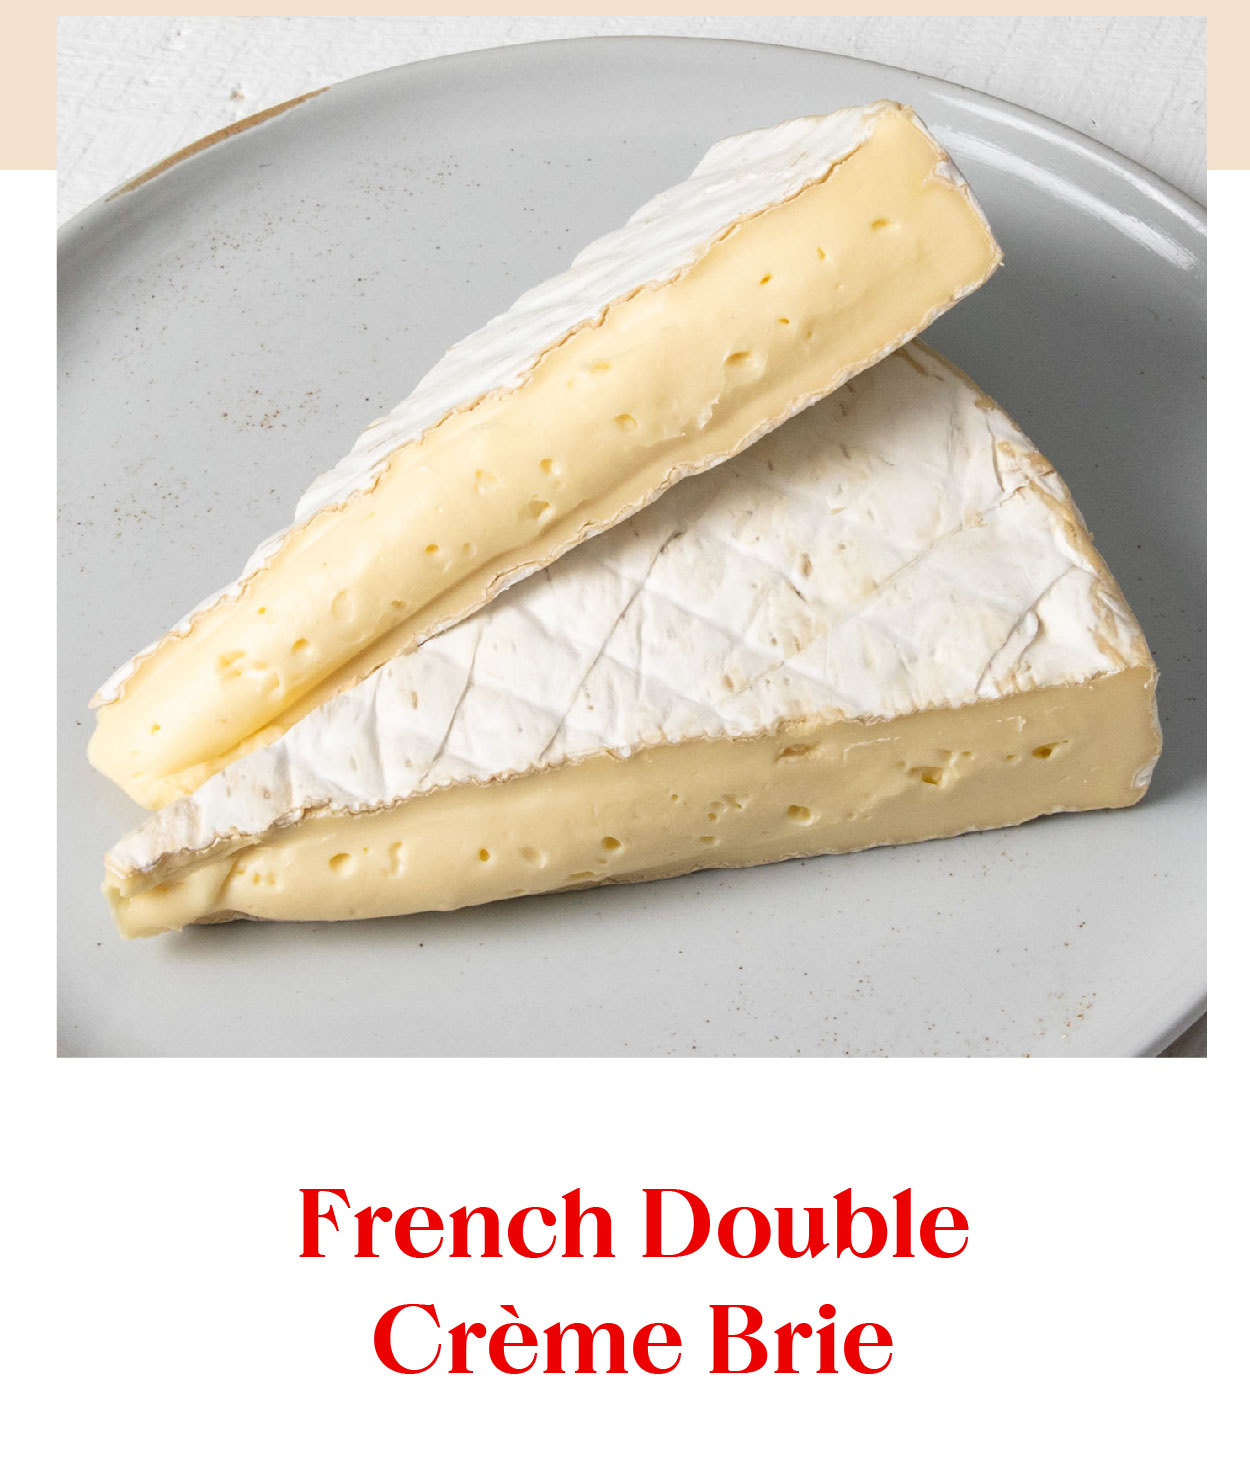 French Double Crme Brie